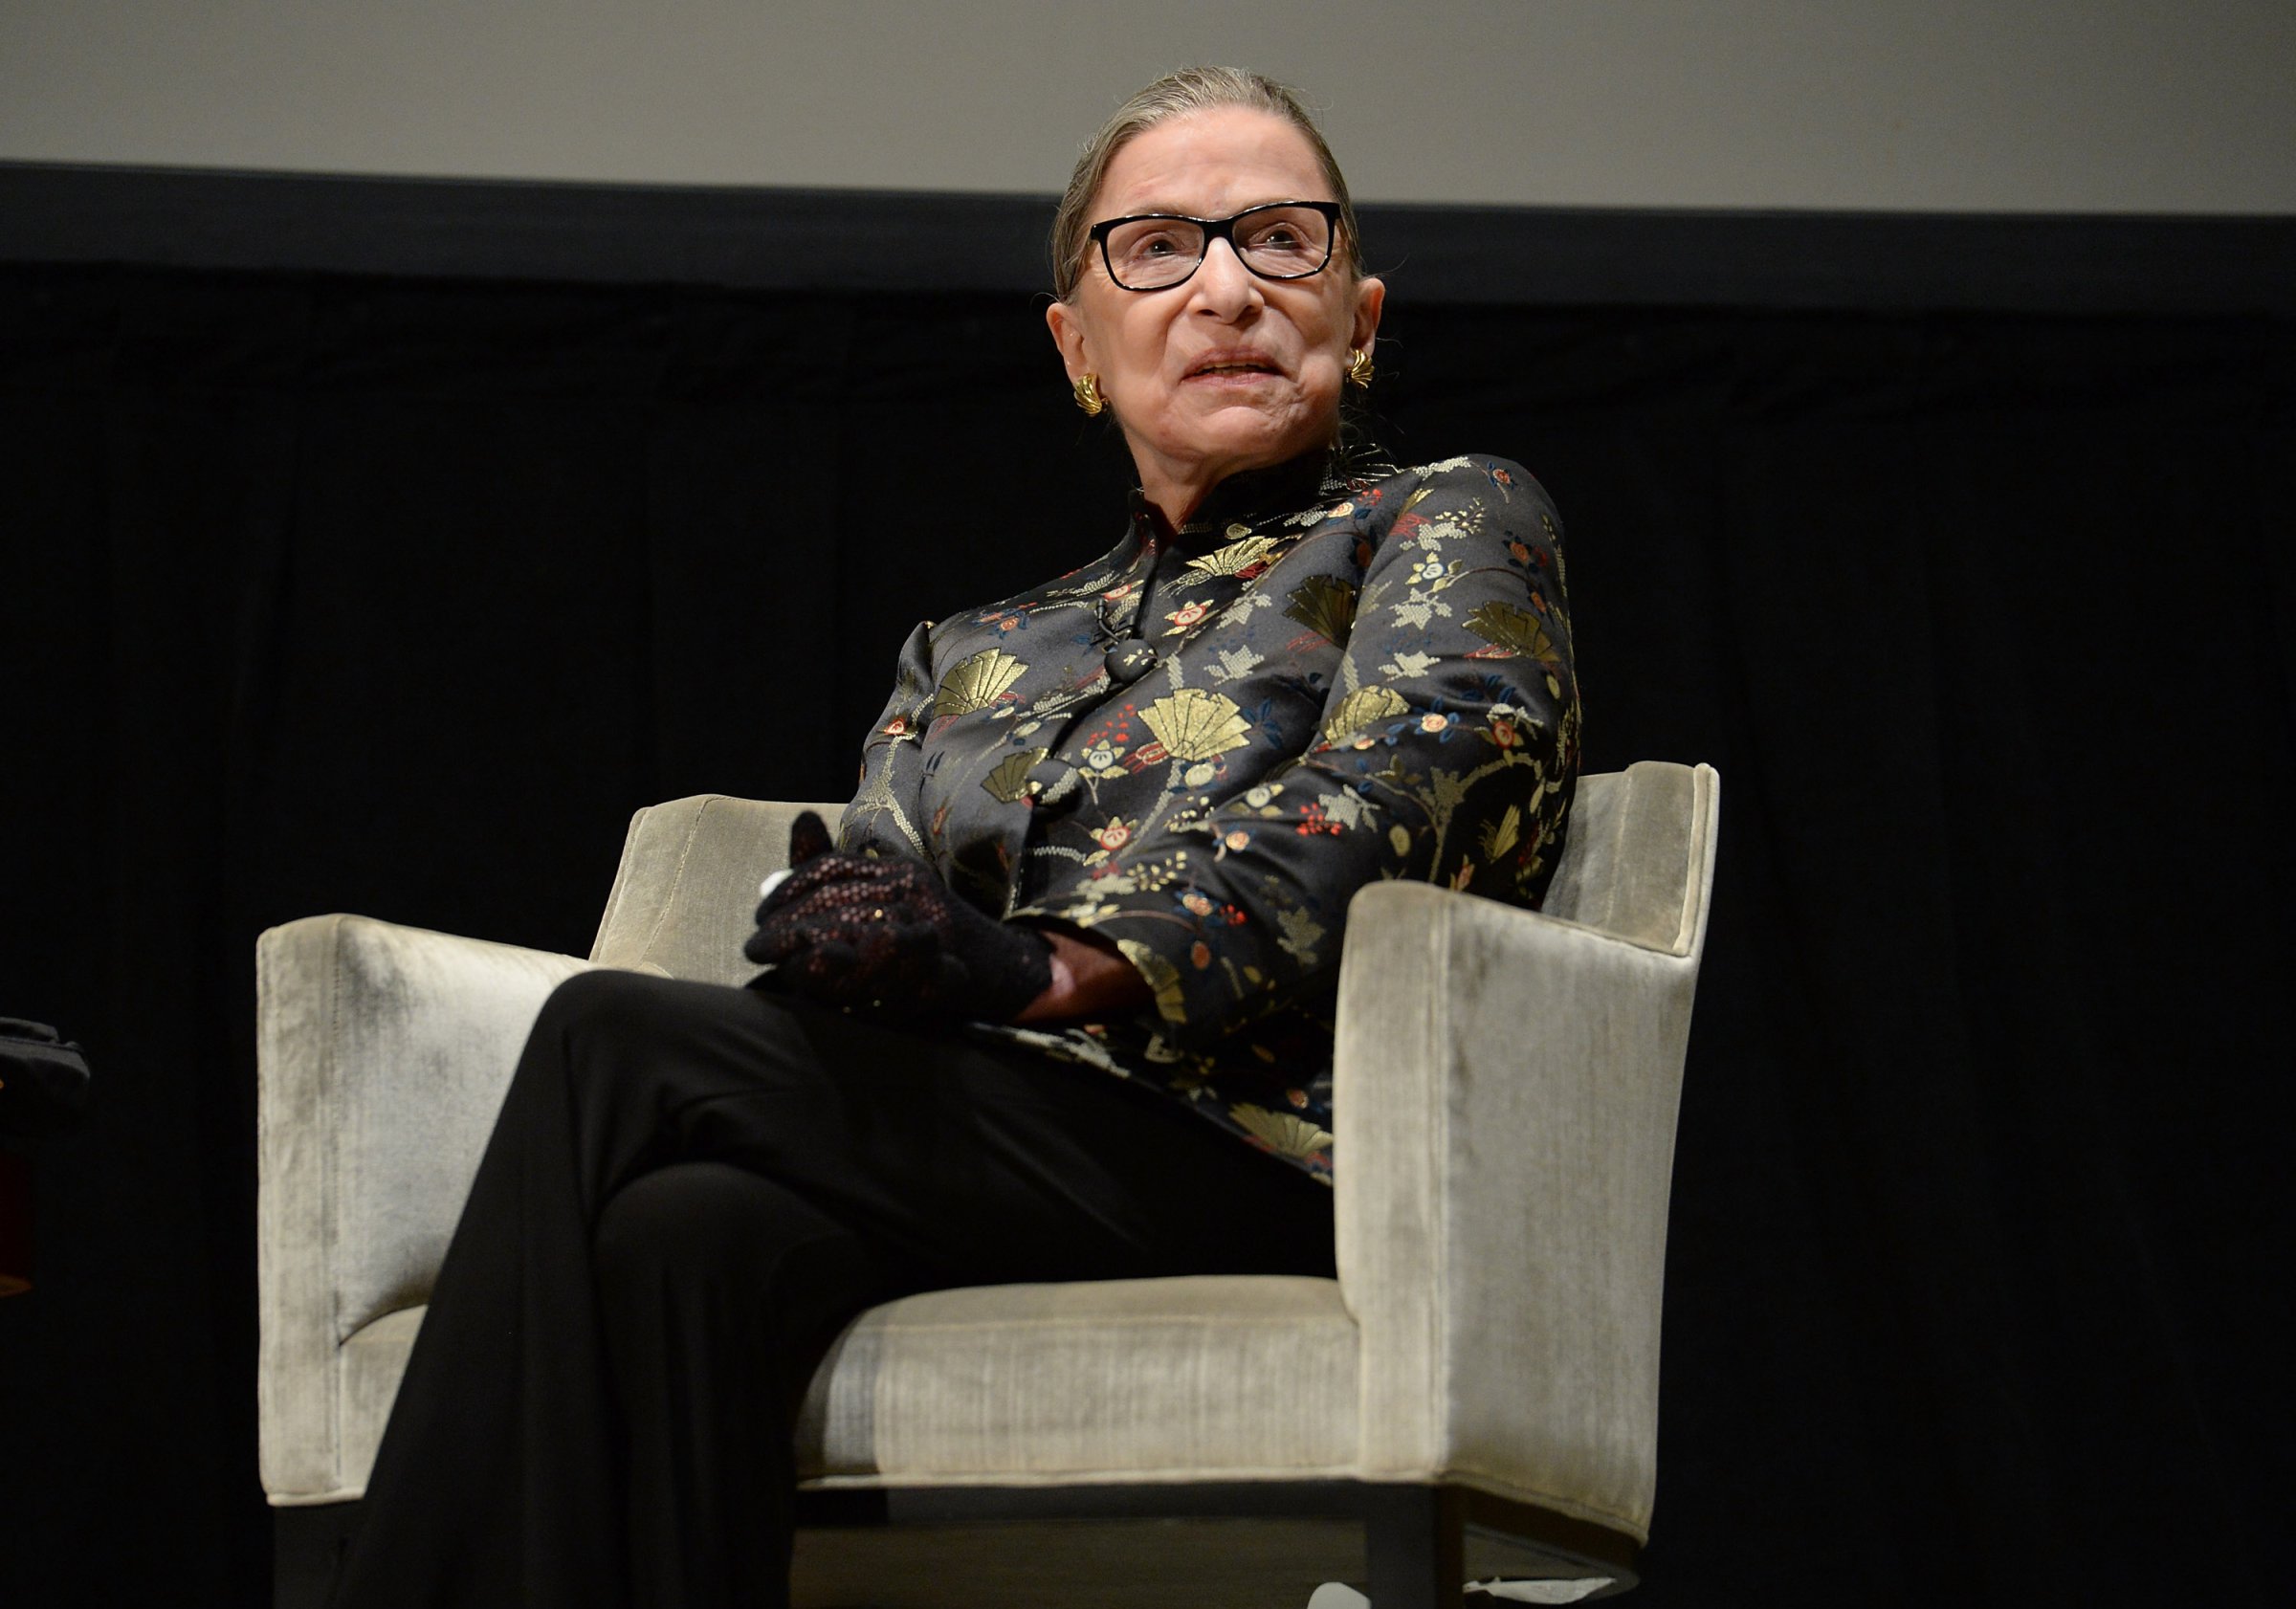 An Historic Evening with Supreme Court Justice Ruth Bader Ginsburg